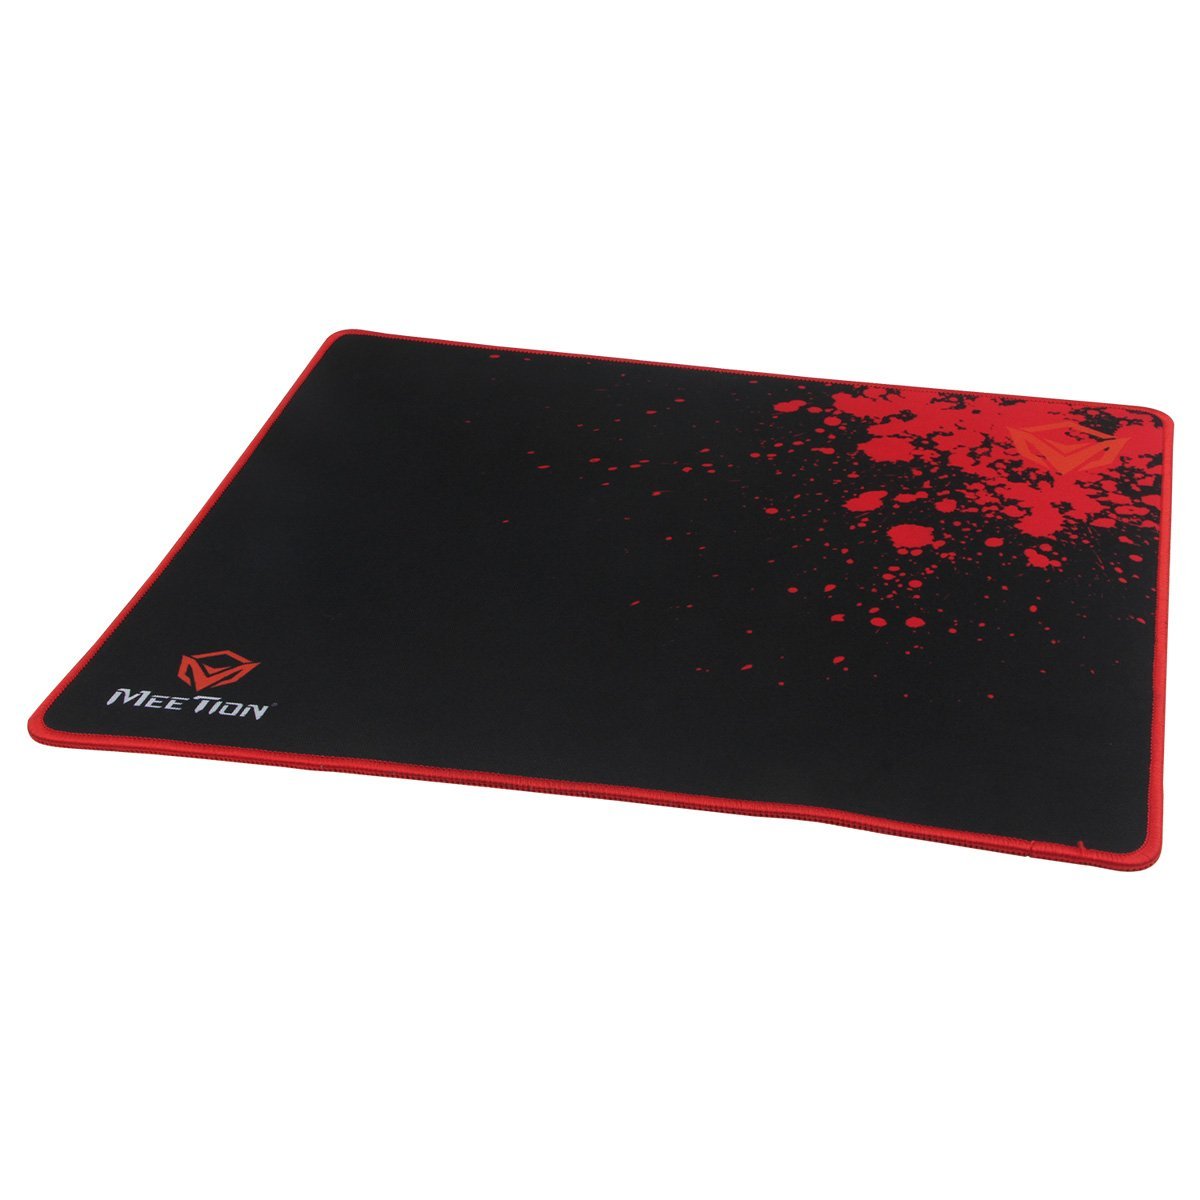 Mouse Pad Meetion